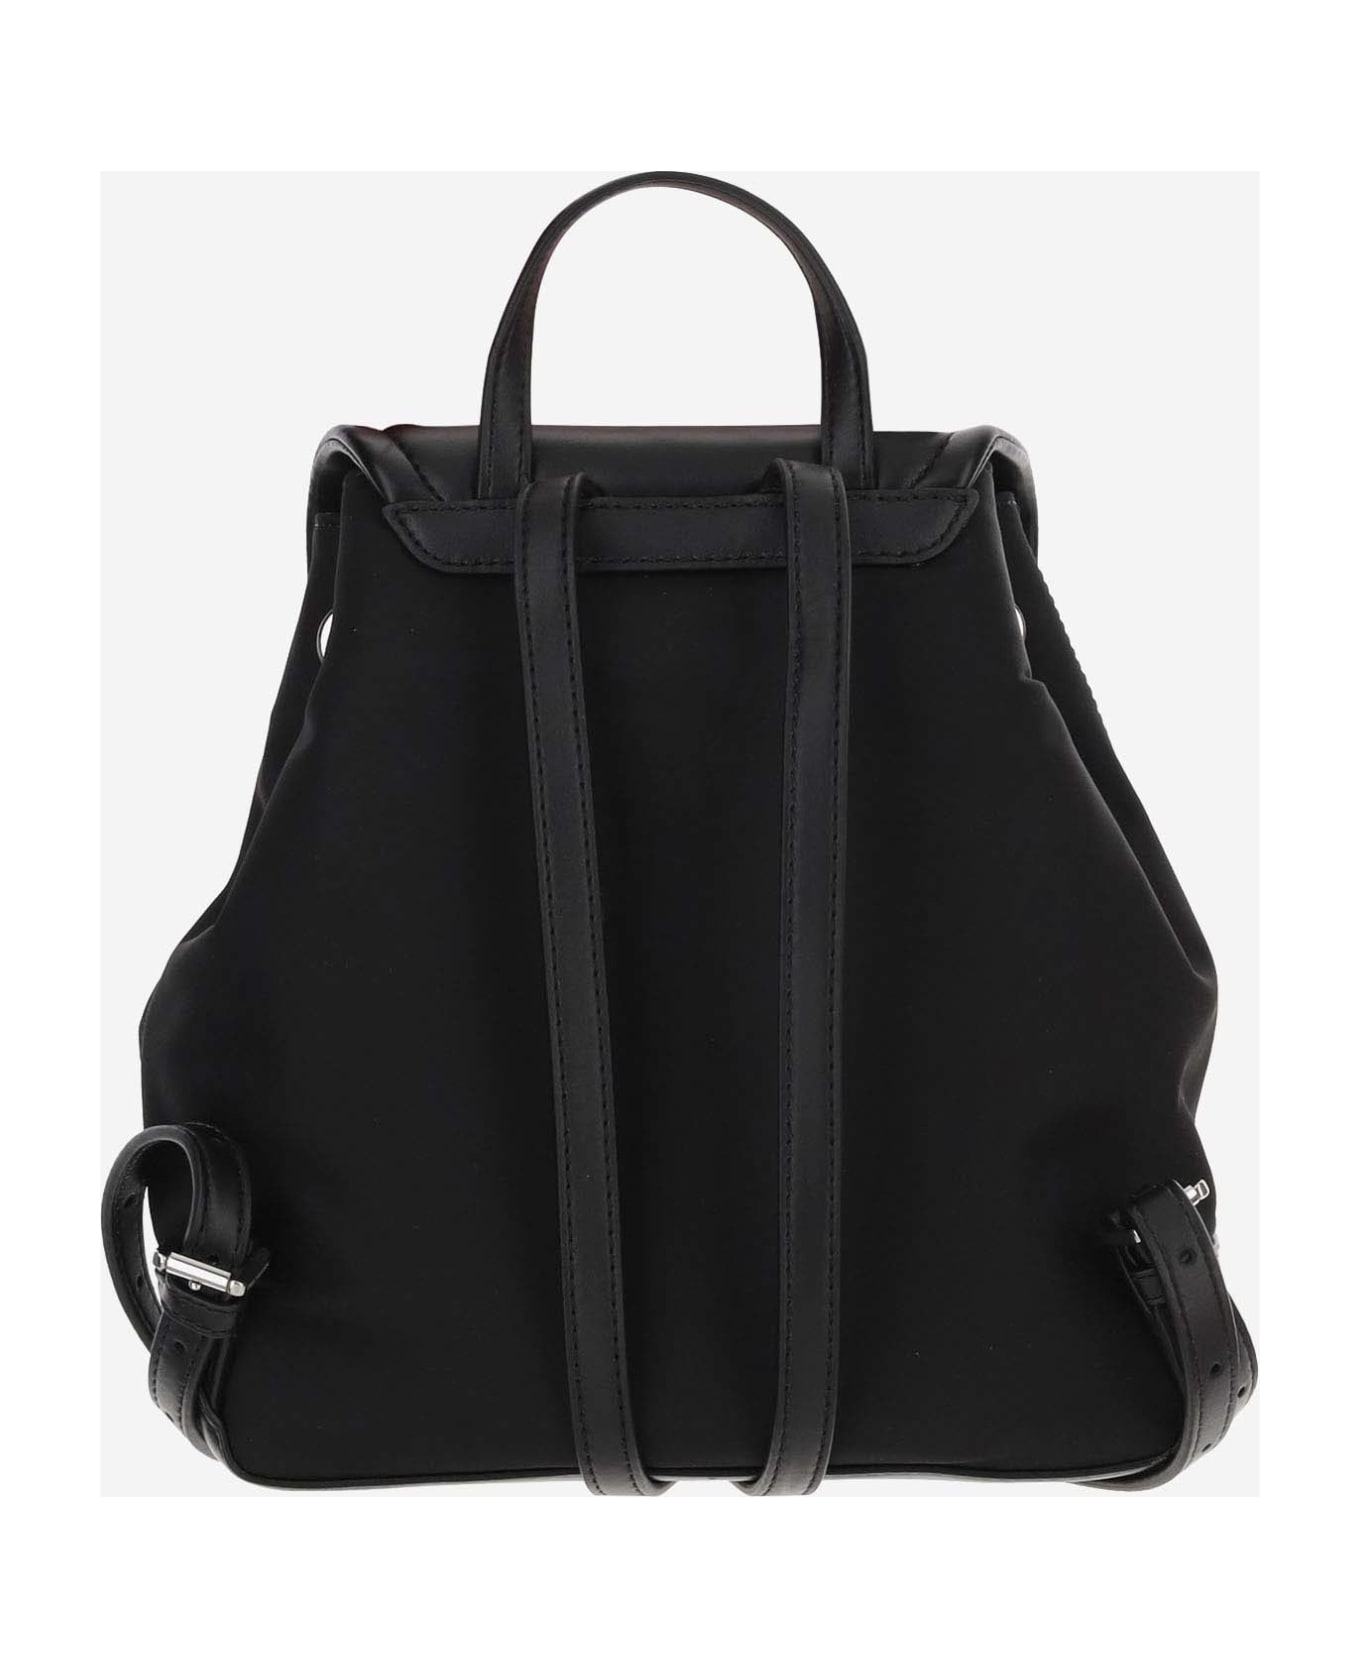 Michael Kors Nylon And Leather Backpack With Logo - Black バックパック